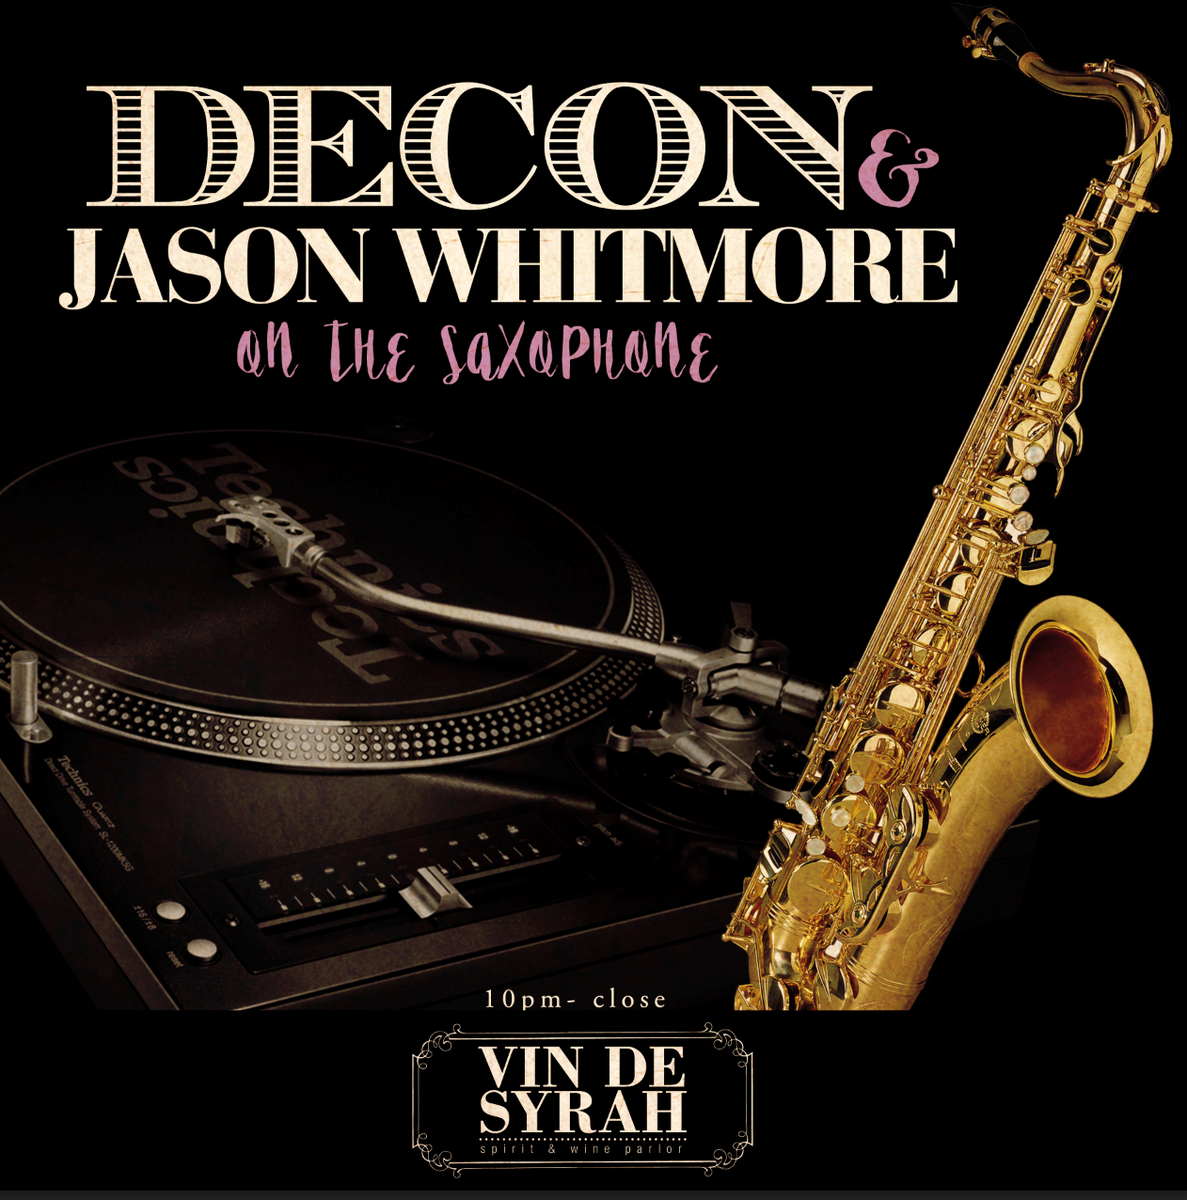 We are always excited for Jason Whitmore playing the saxophone alongside Dj Decon! See you tonight!